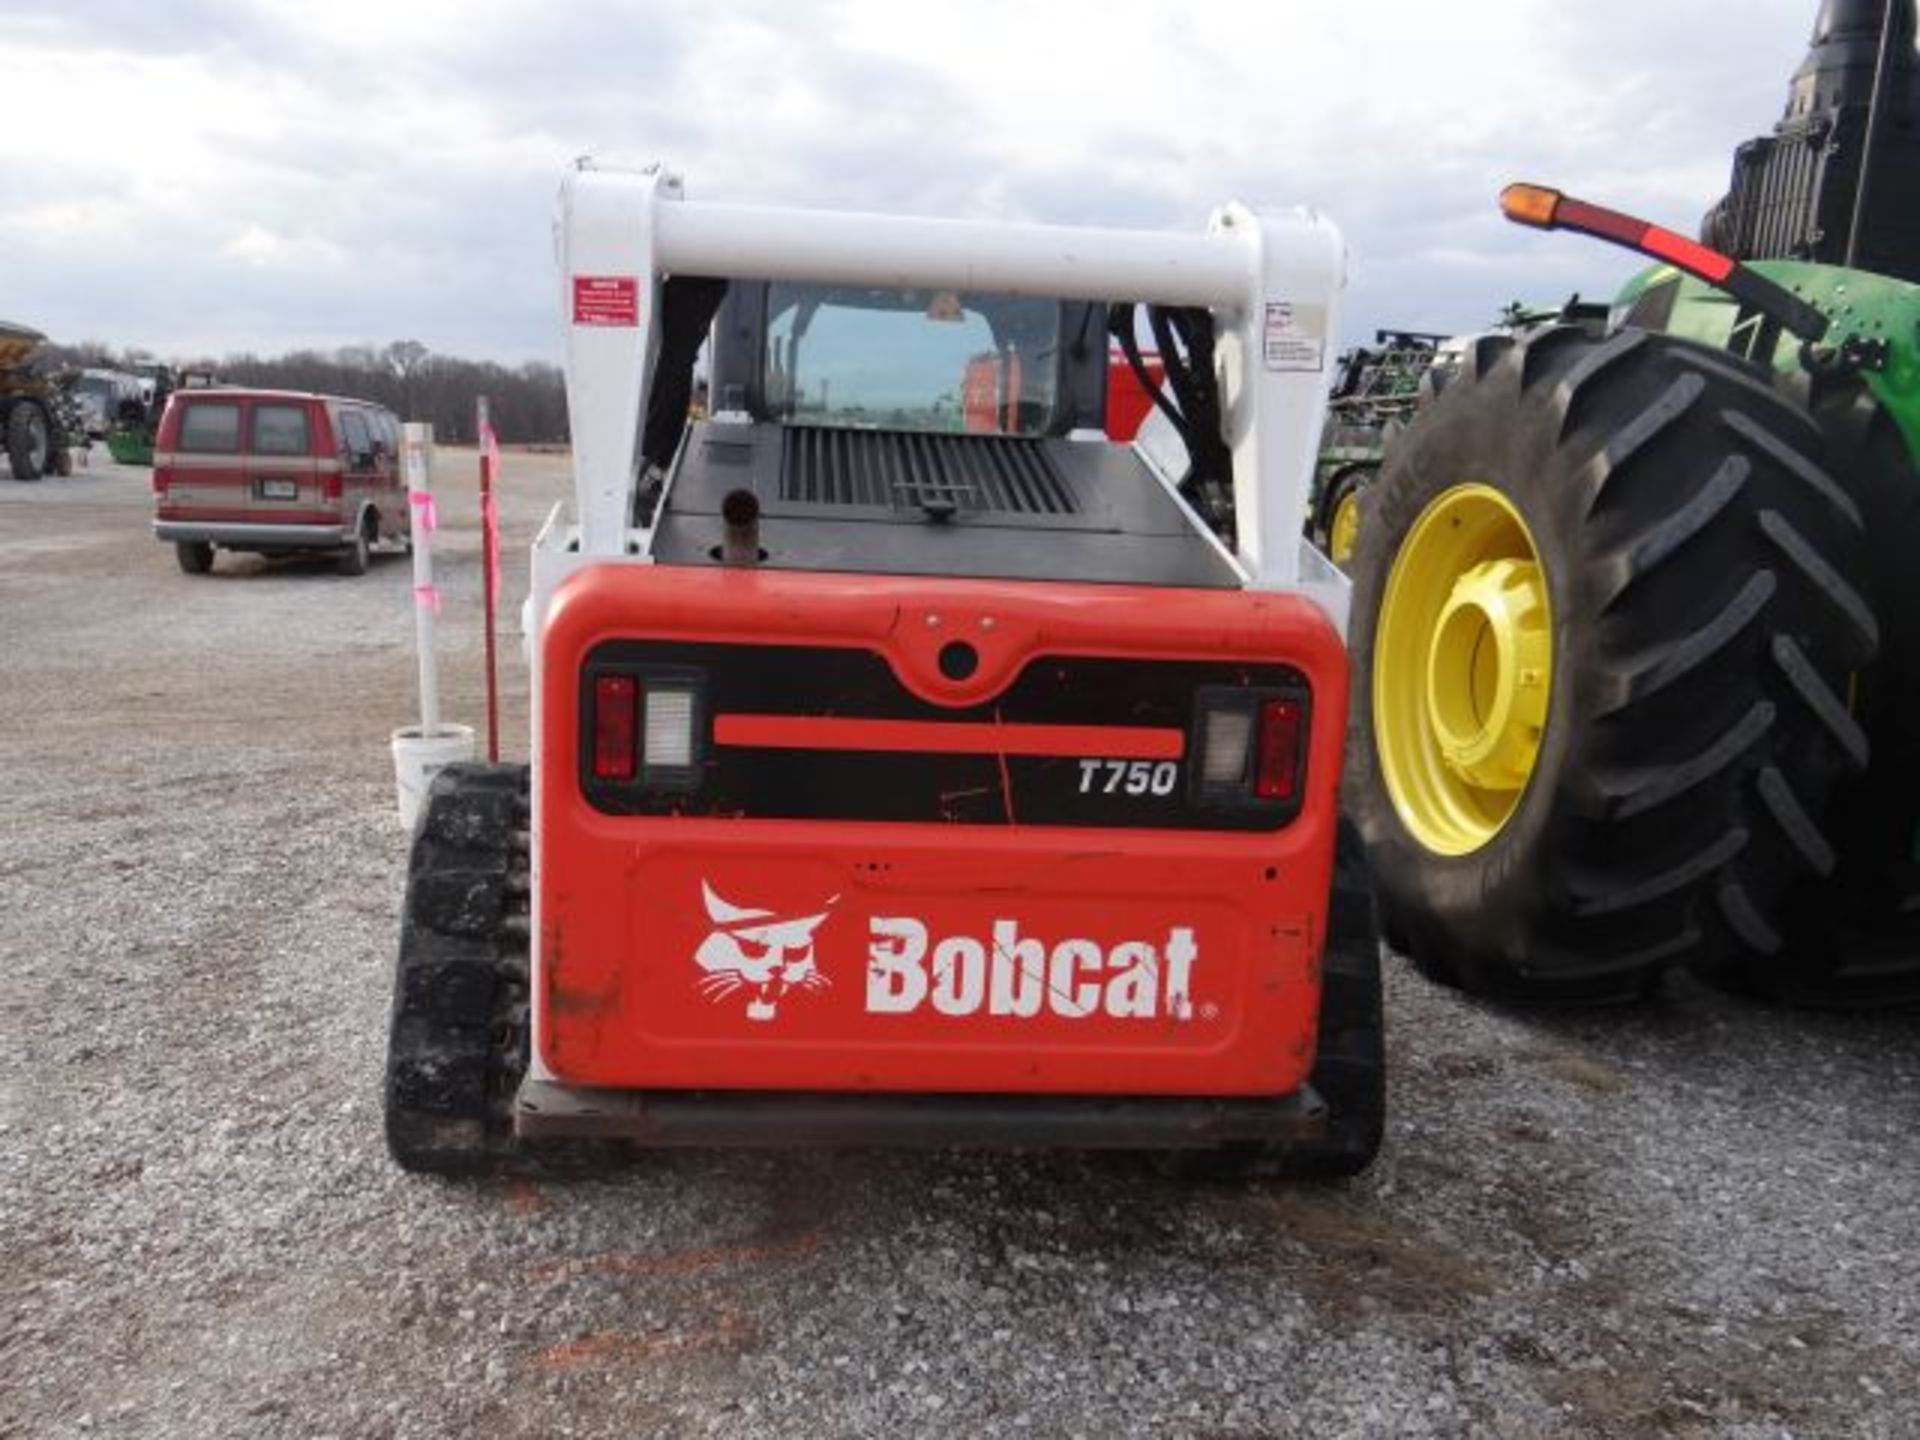 Bobcat T750, 2014 #158901, CTL, Cab w/ AC and Heat, Joystick Controls Switchable From ISO and H - Image 5 of 6